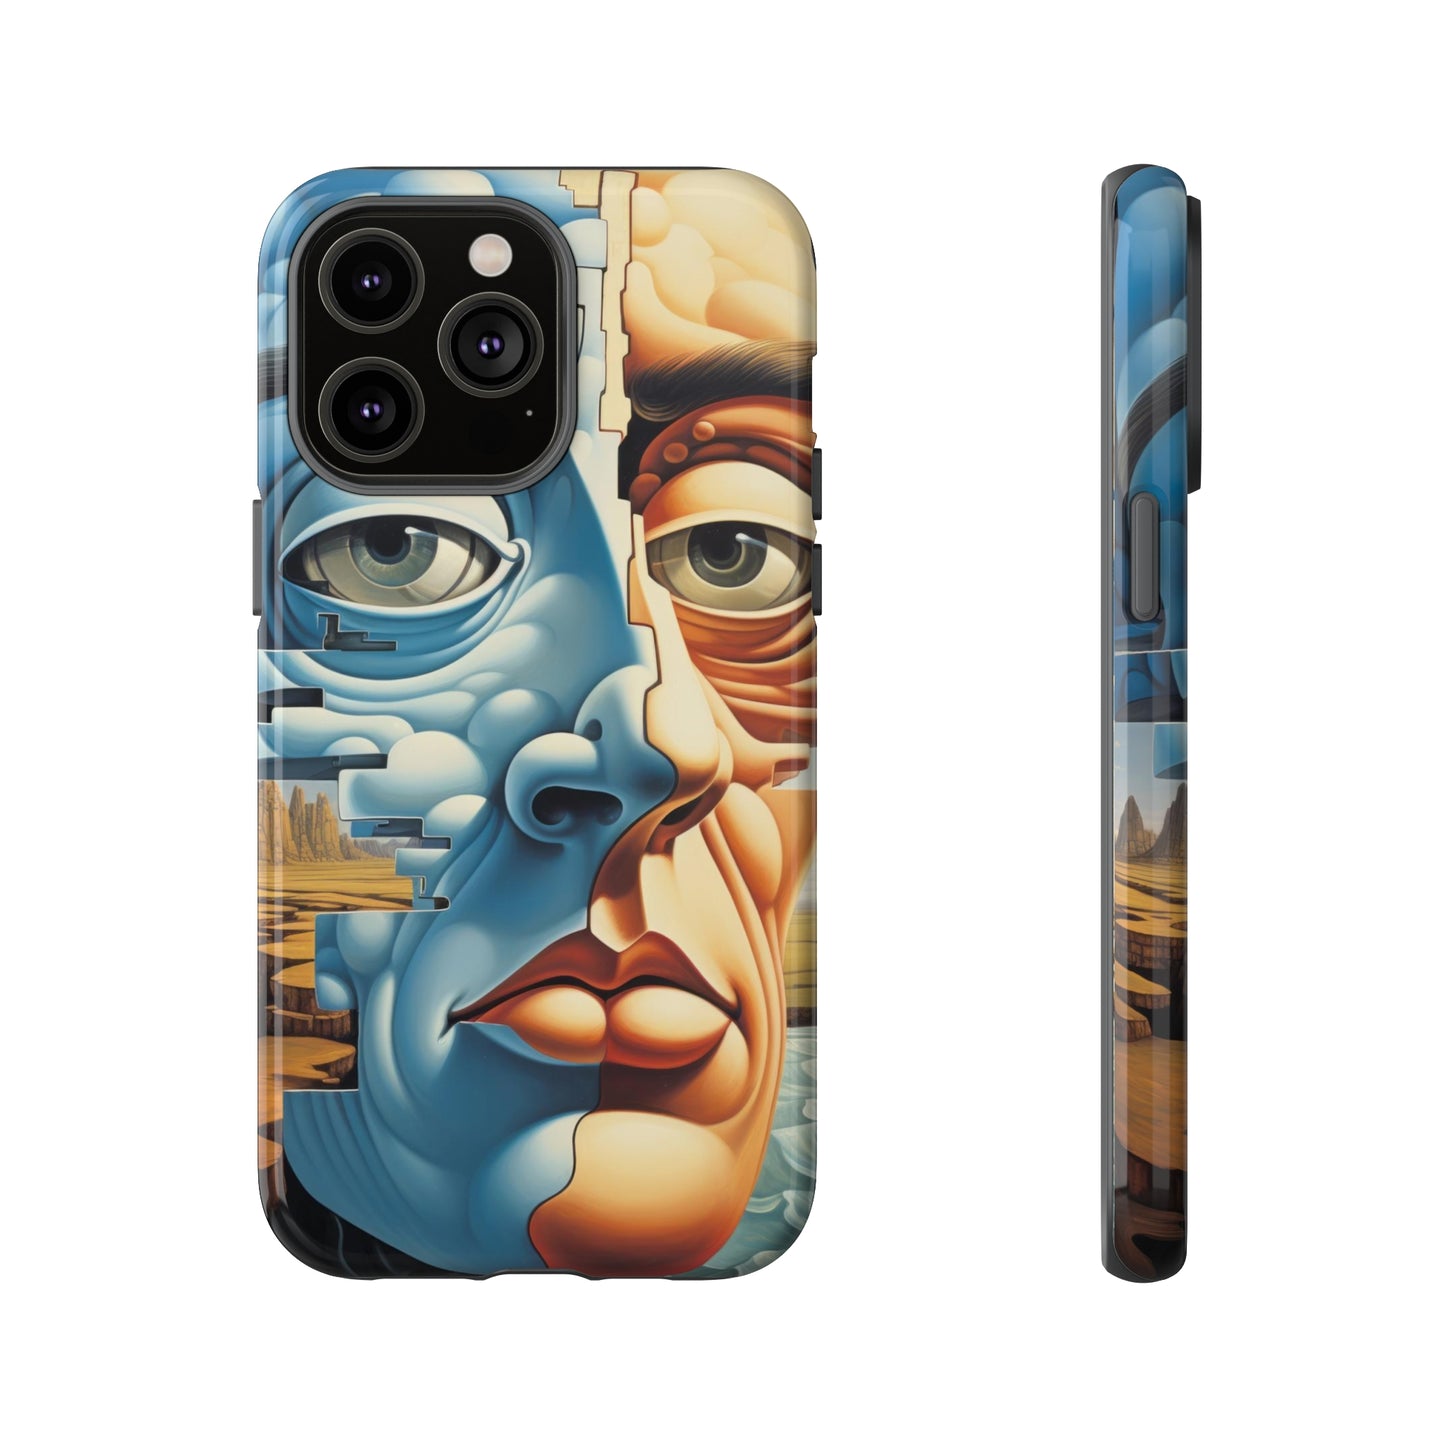 Cubist Cascade: Dual-Toned Face in Watery Reverie Phone Case for iPhone, Samsung, Pixel